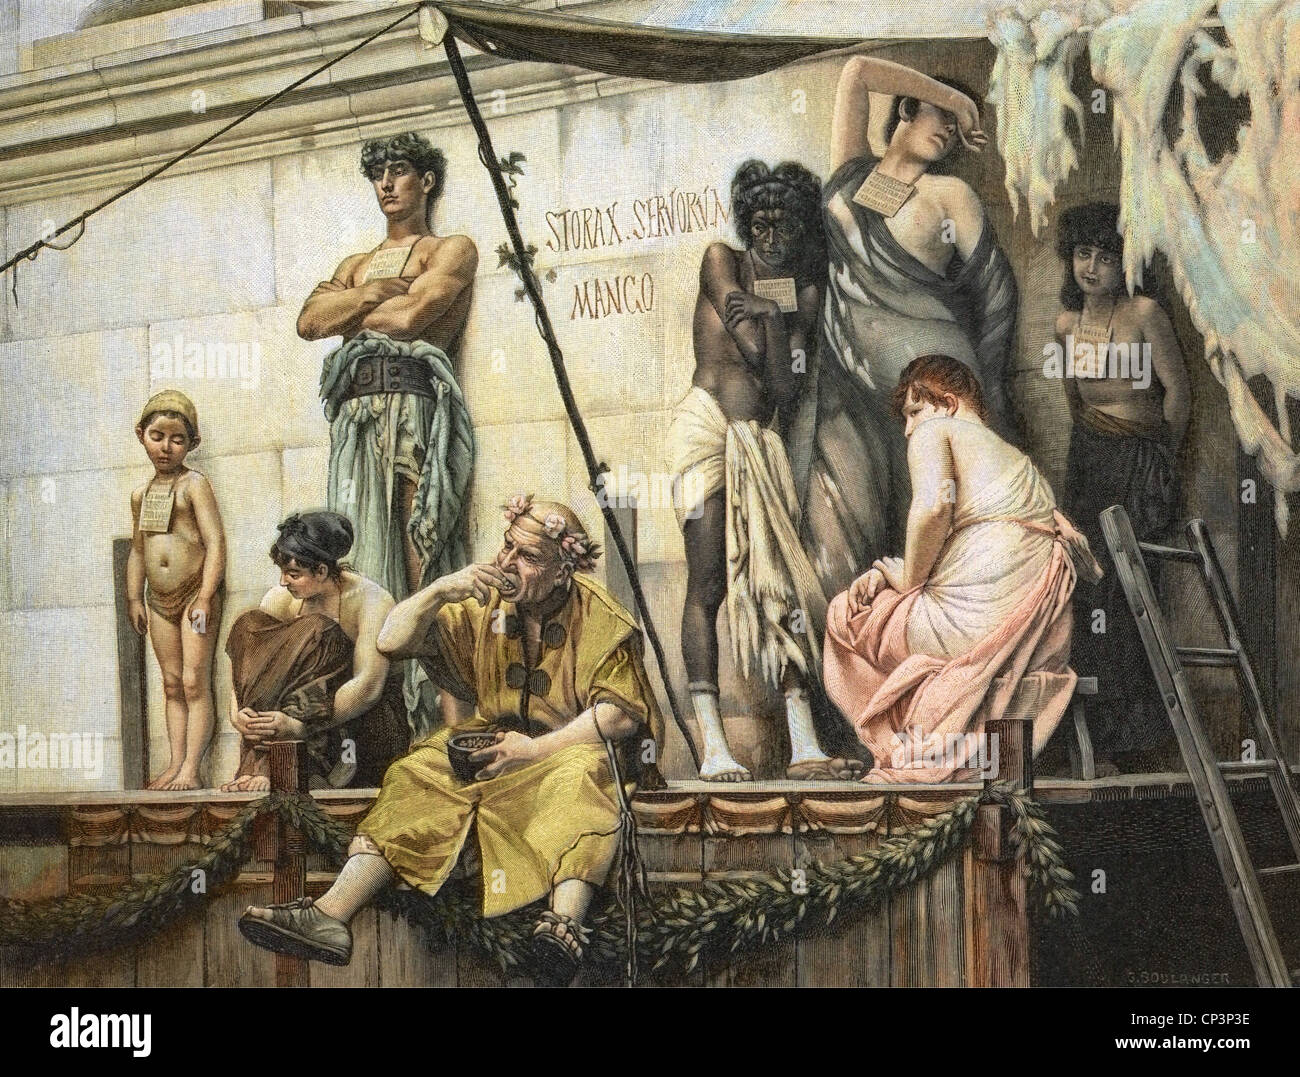 slavery, ancient world, Roman slave market, wood engraving after painting by Gustave Boulanger, 19th century, historic, historical, trader, traders, merchant, merchants, slaves, platform, pedestal, platforms, pedestals, ancient world, people, Additional-Rights-Clearences-Not Available Stock Photo